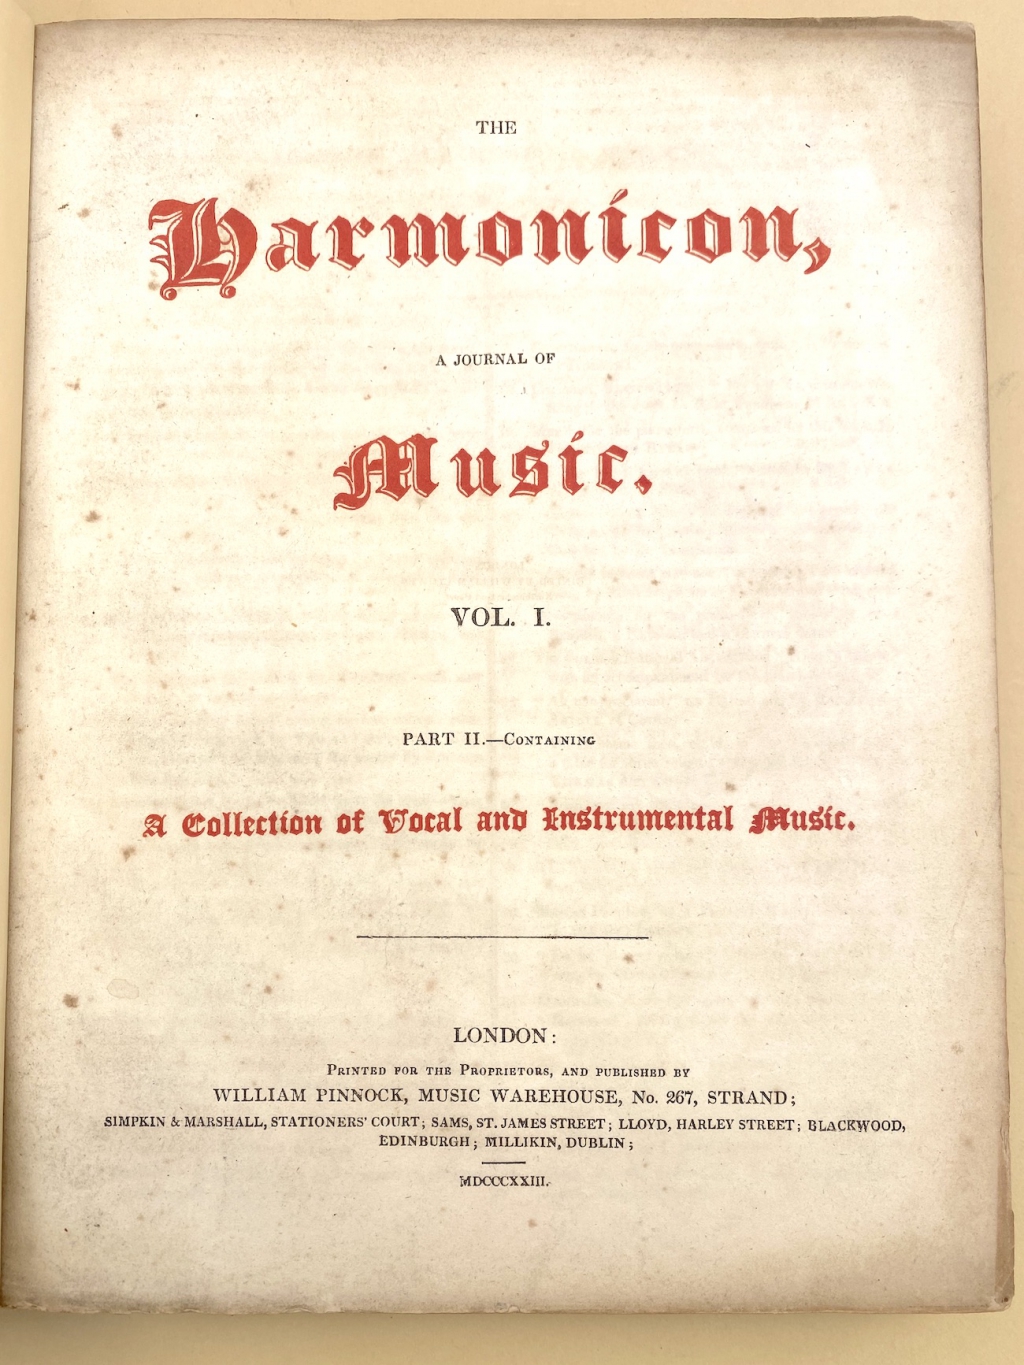 Title page of the first annual collected volume of The Harmonicon magazine.